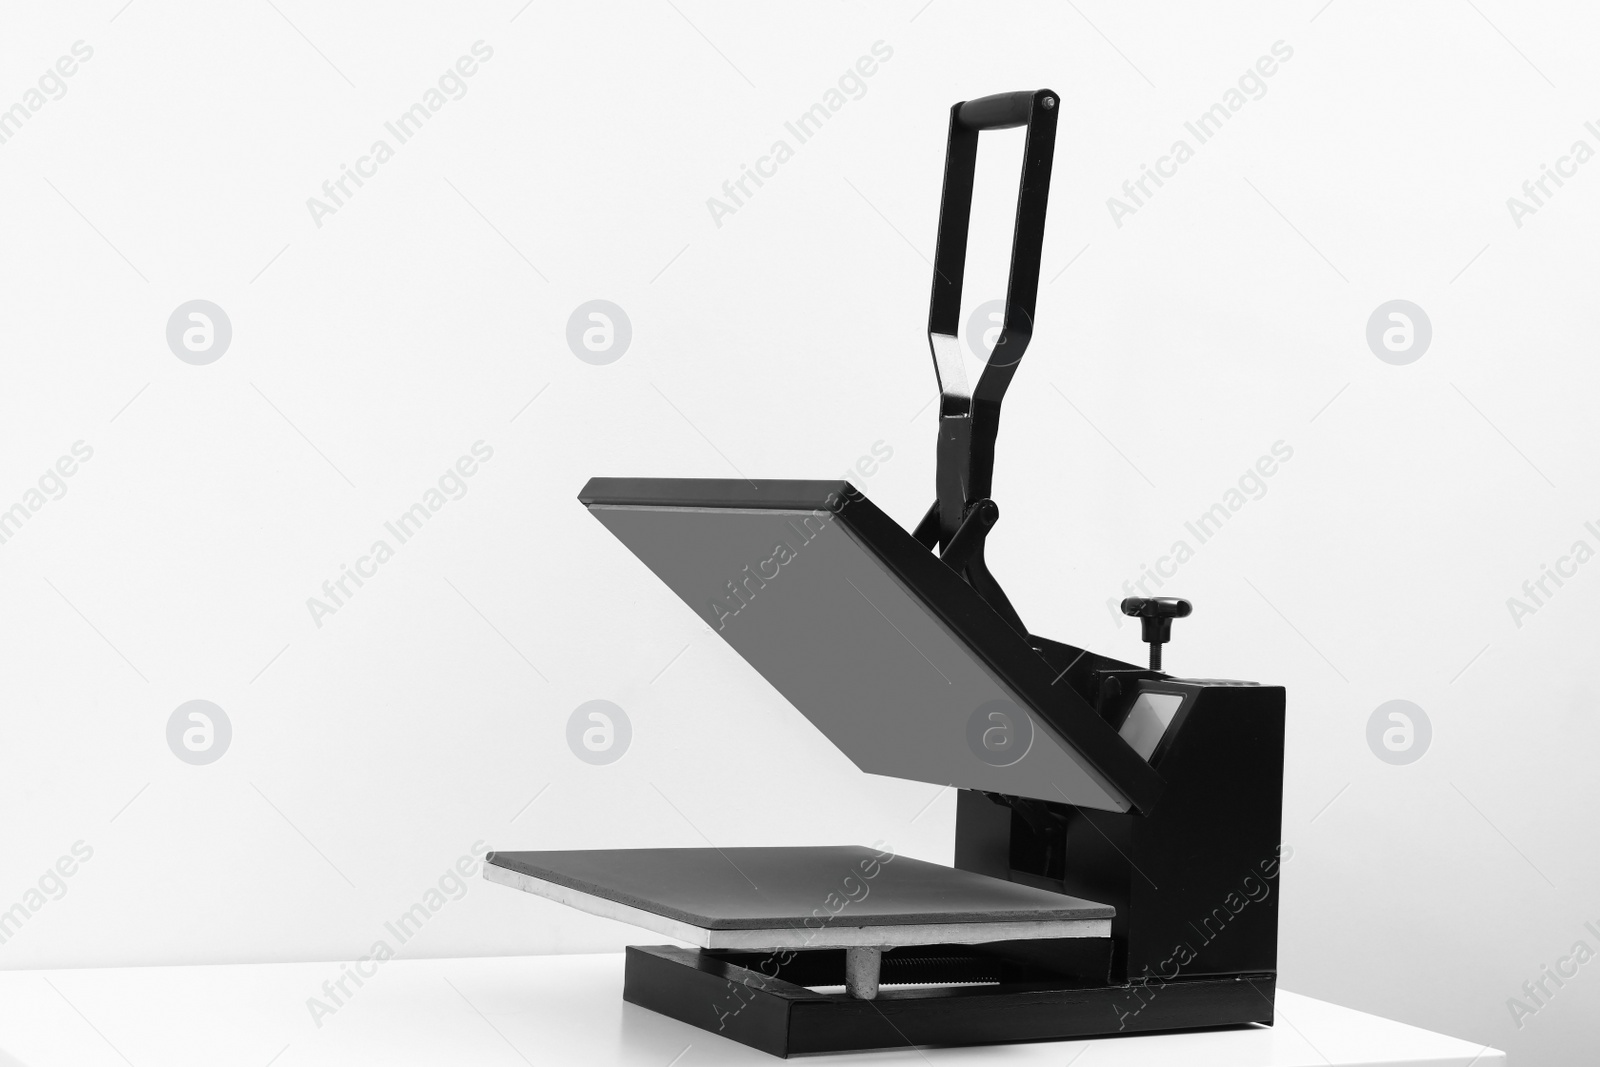 Photo of Heat press machine on table against light background